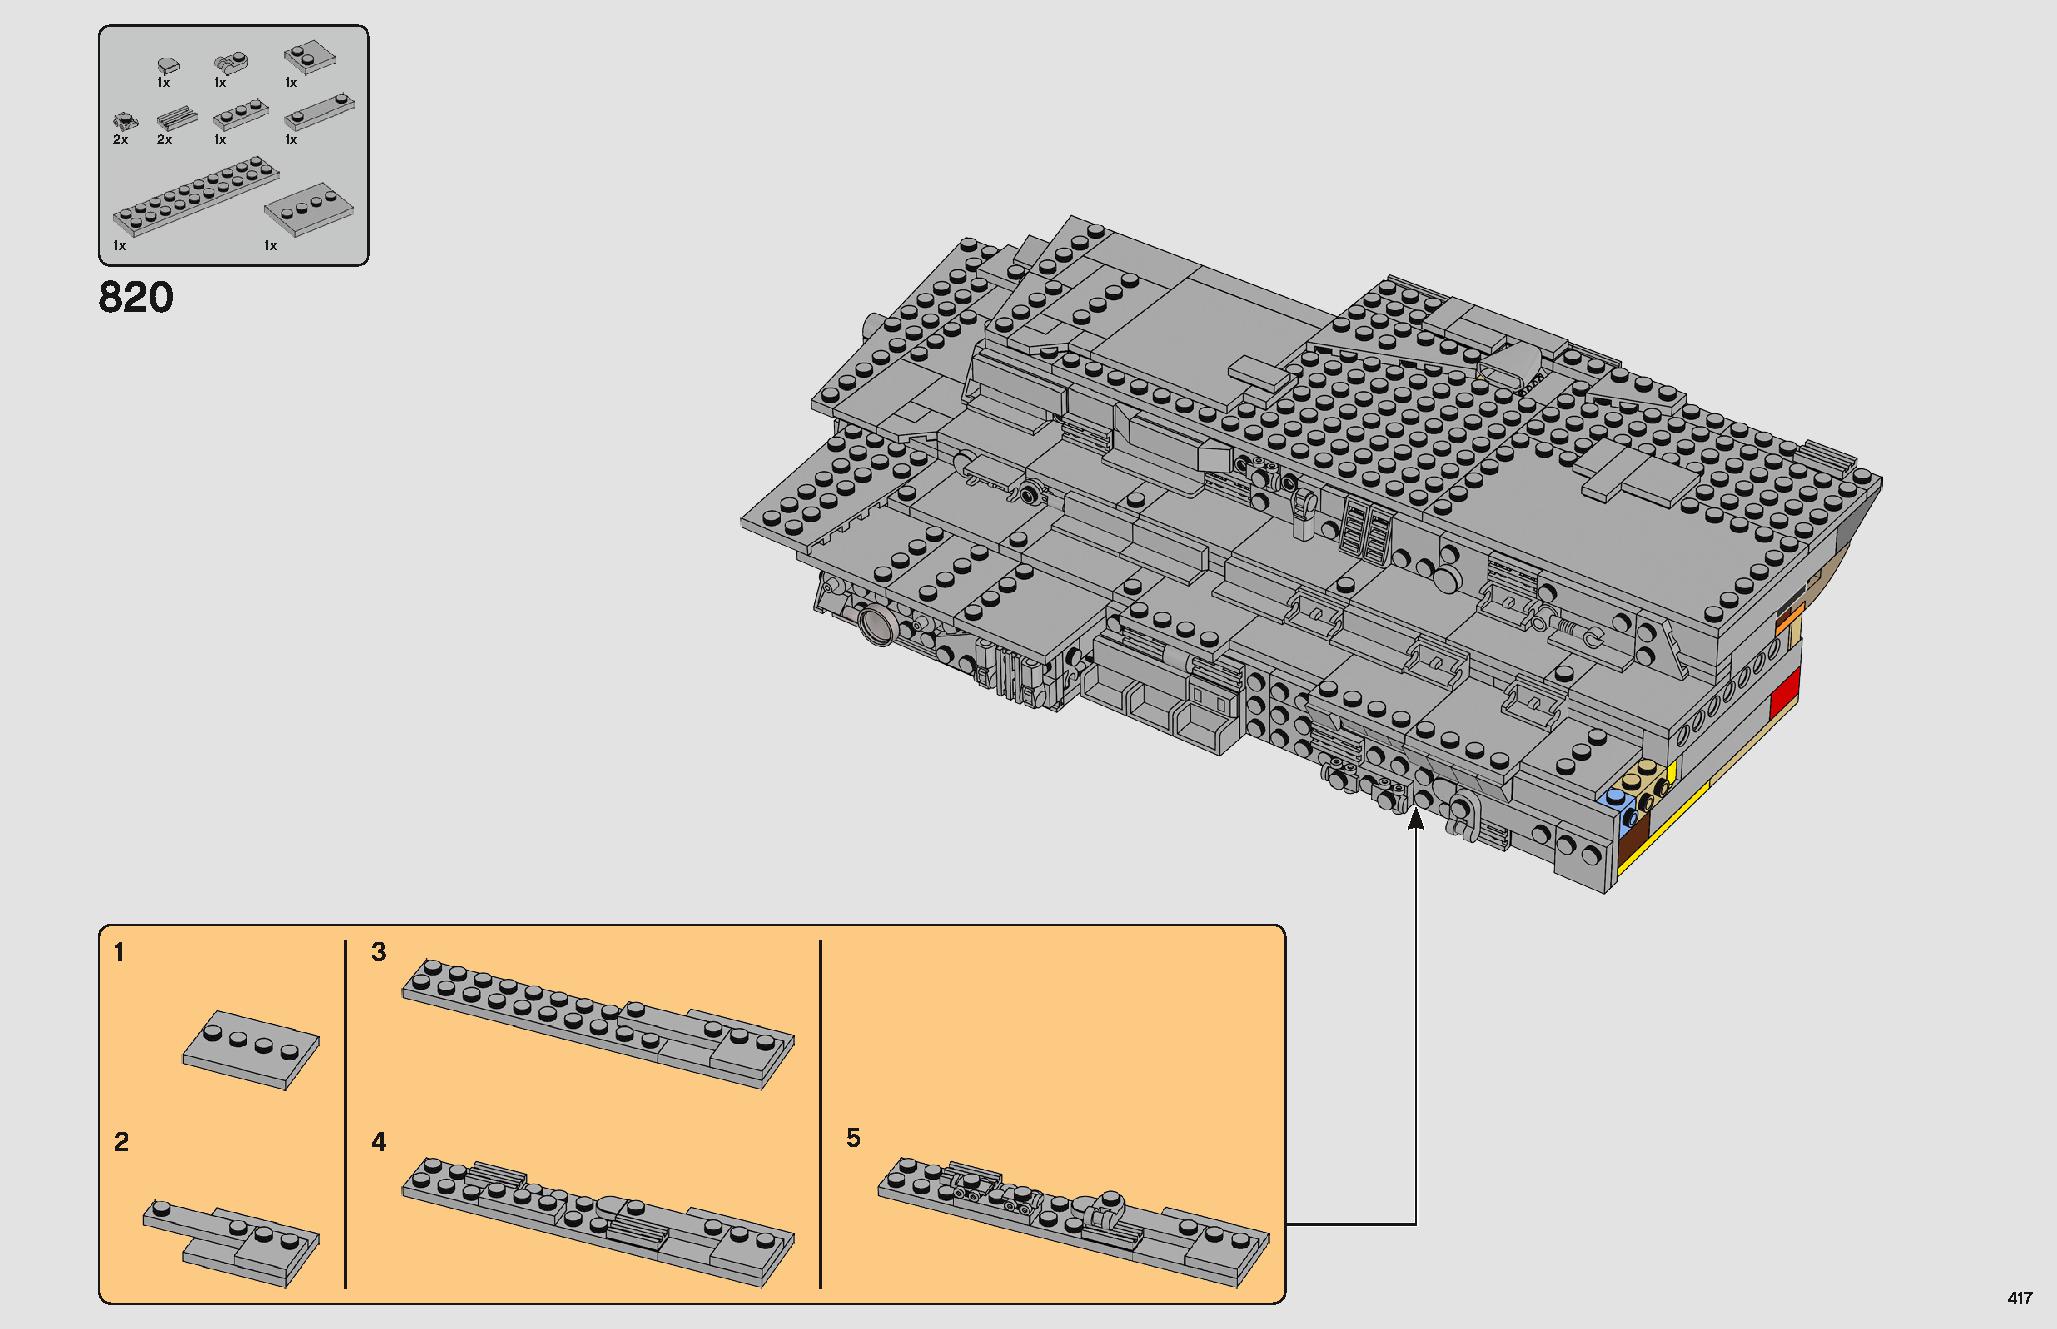 Imperial Star Destroyer 75252 レゴの商品情報 レゴの説明書・組立方法 417 page